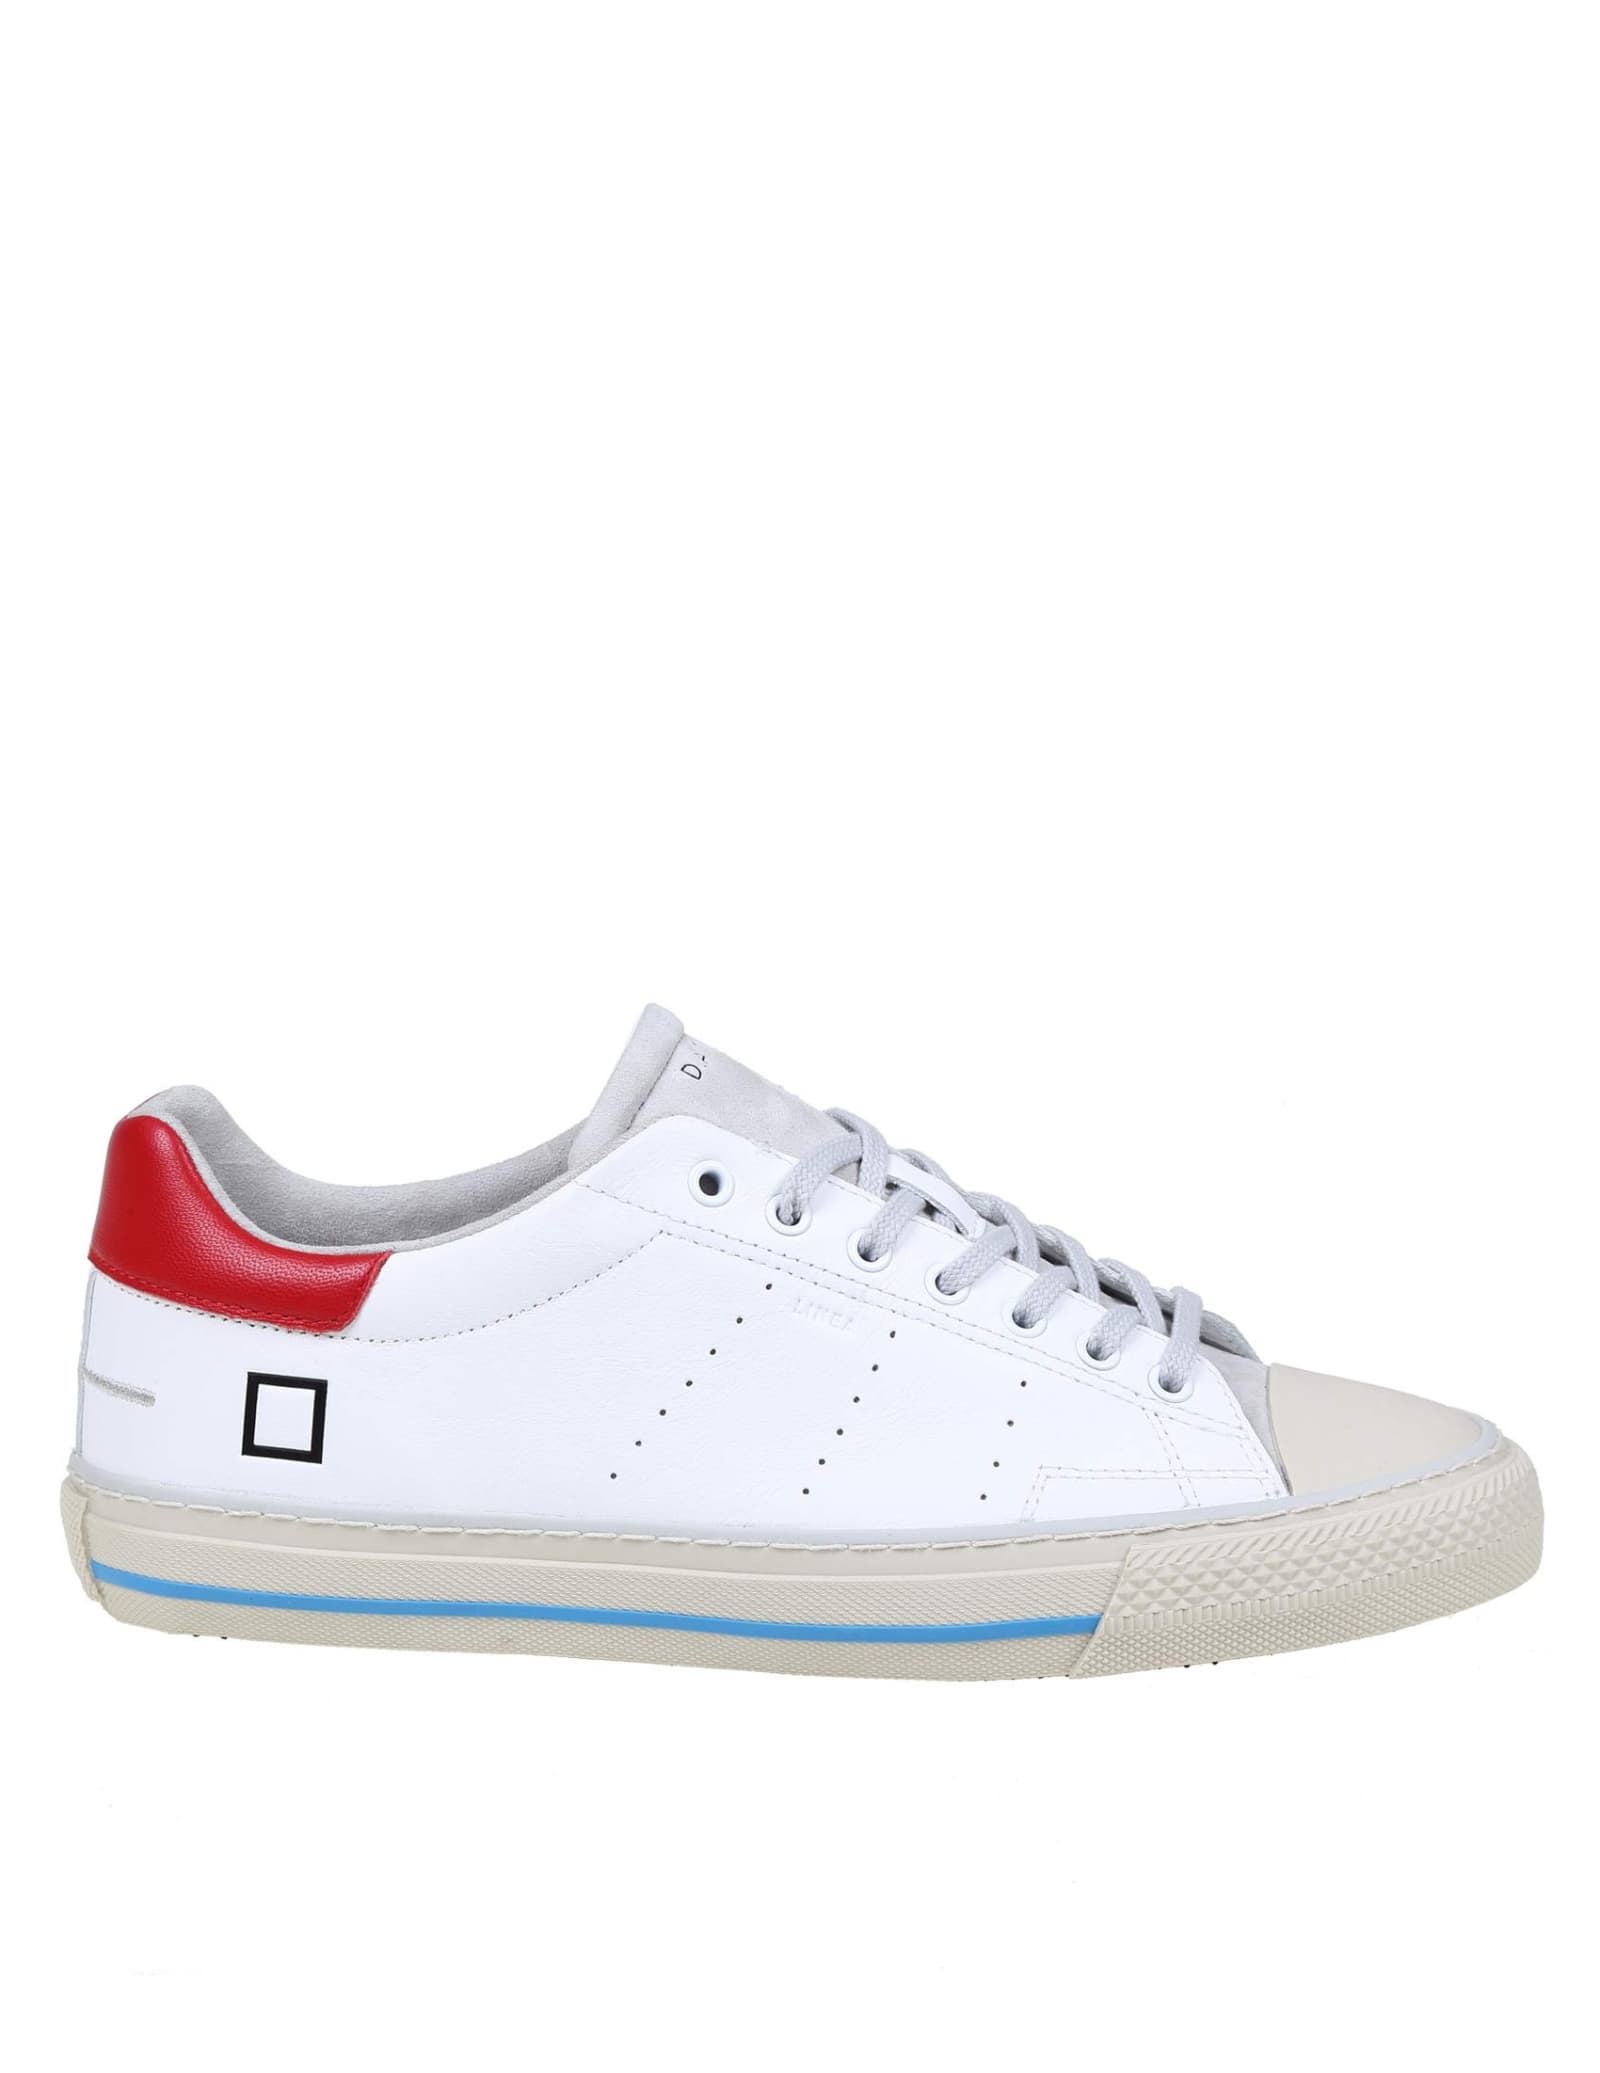 D.A.T.E. White And Red Leather Sneakers